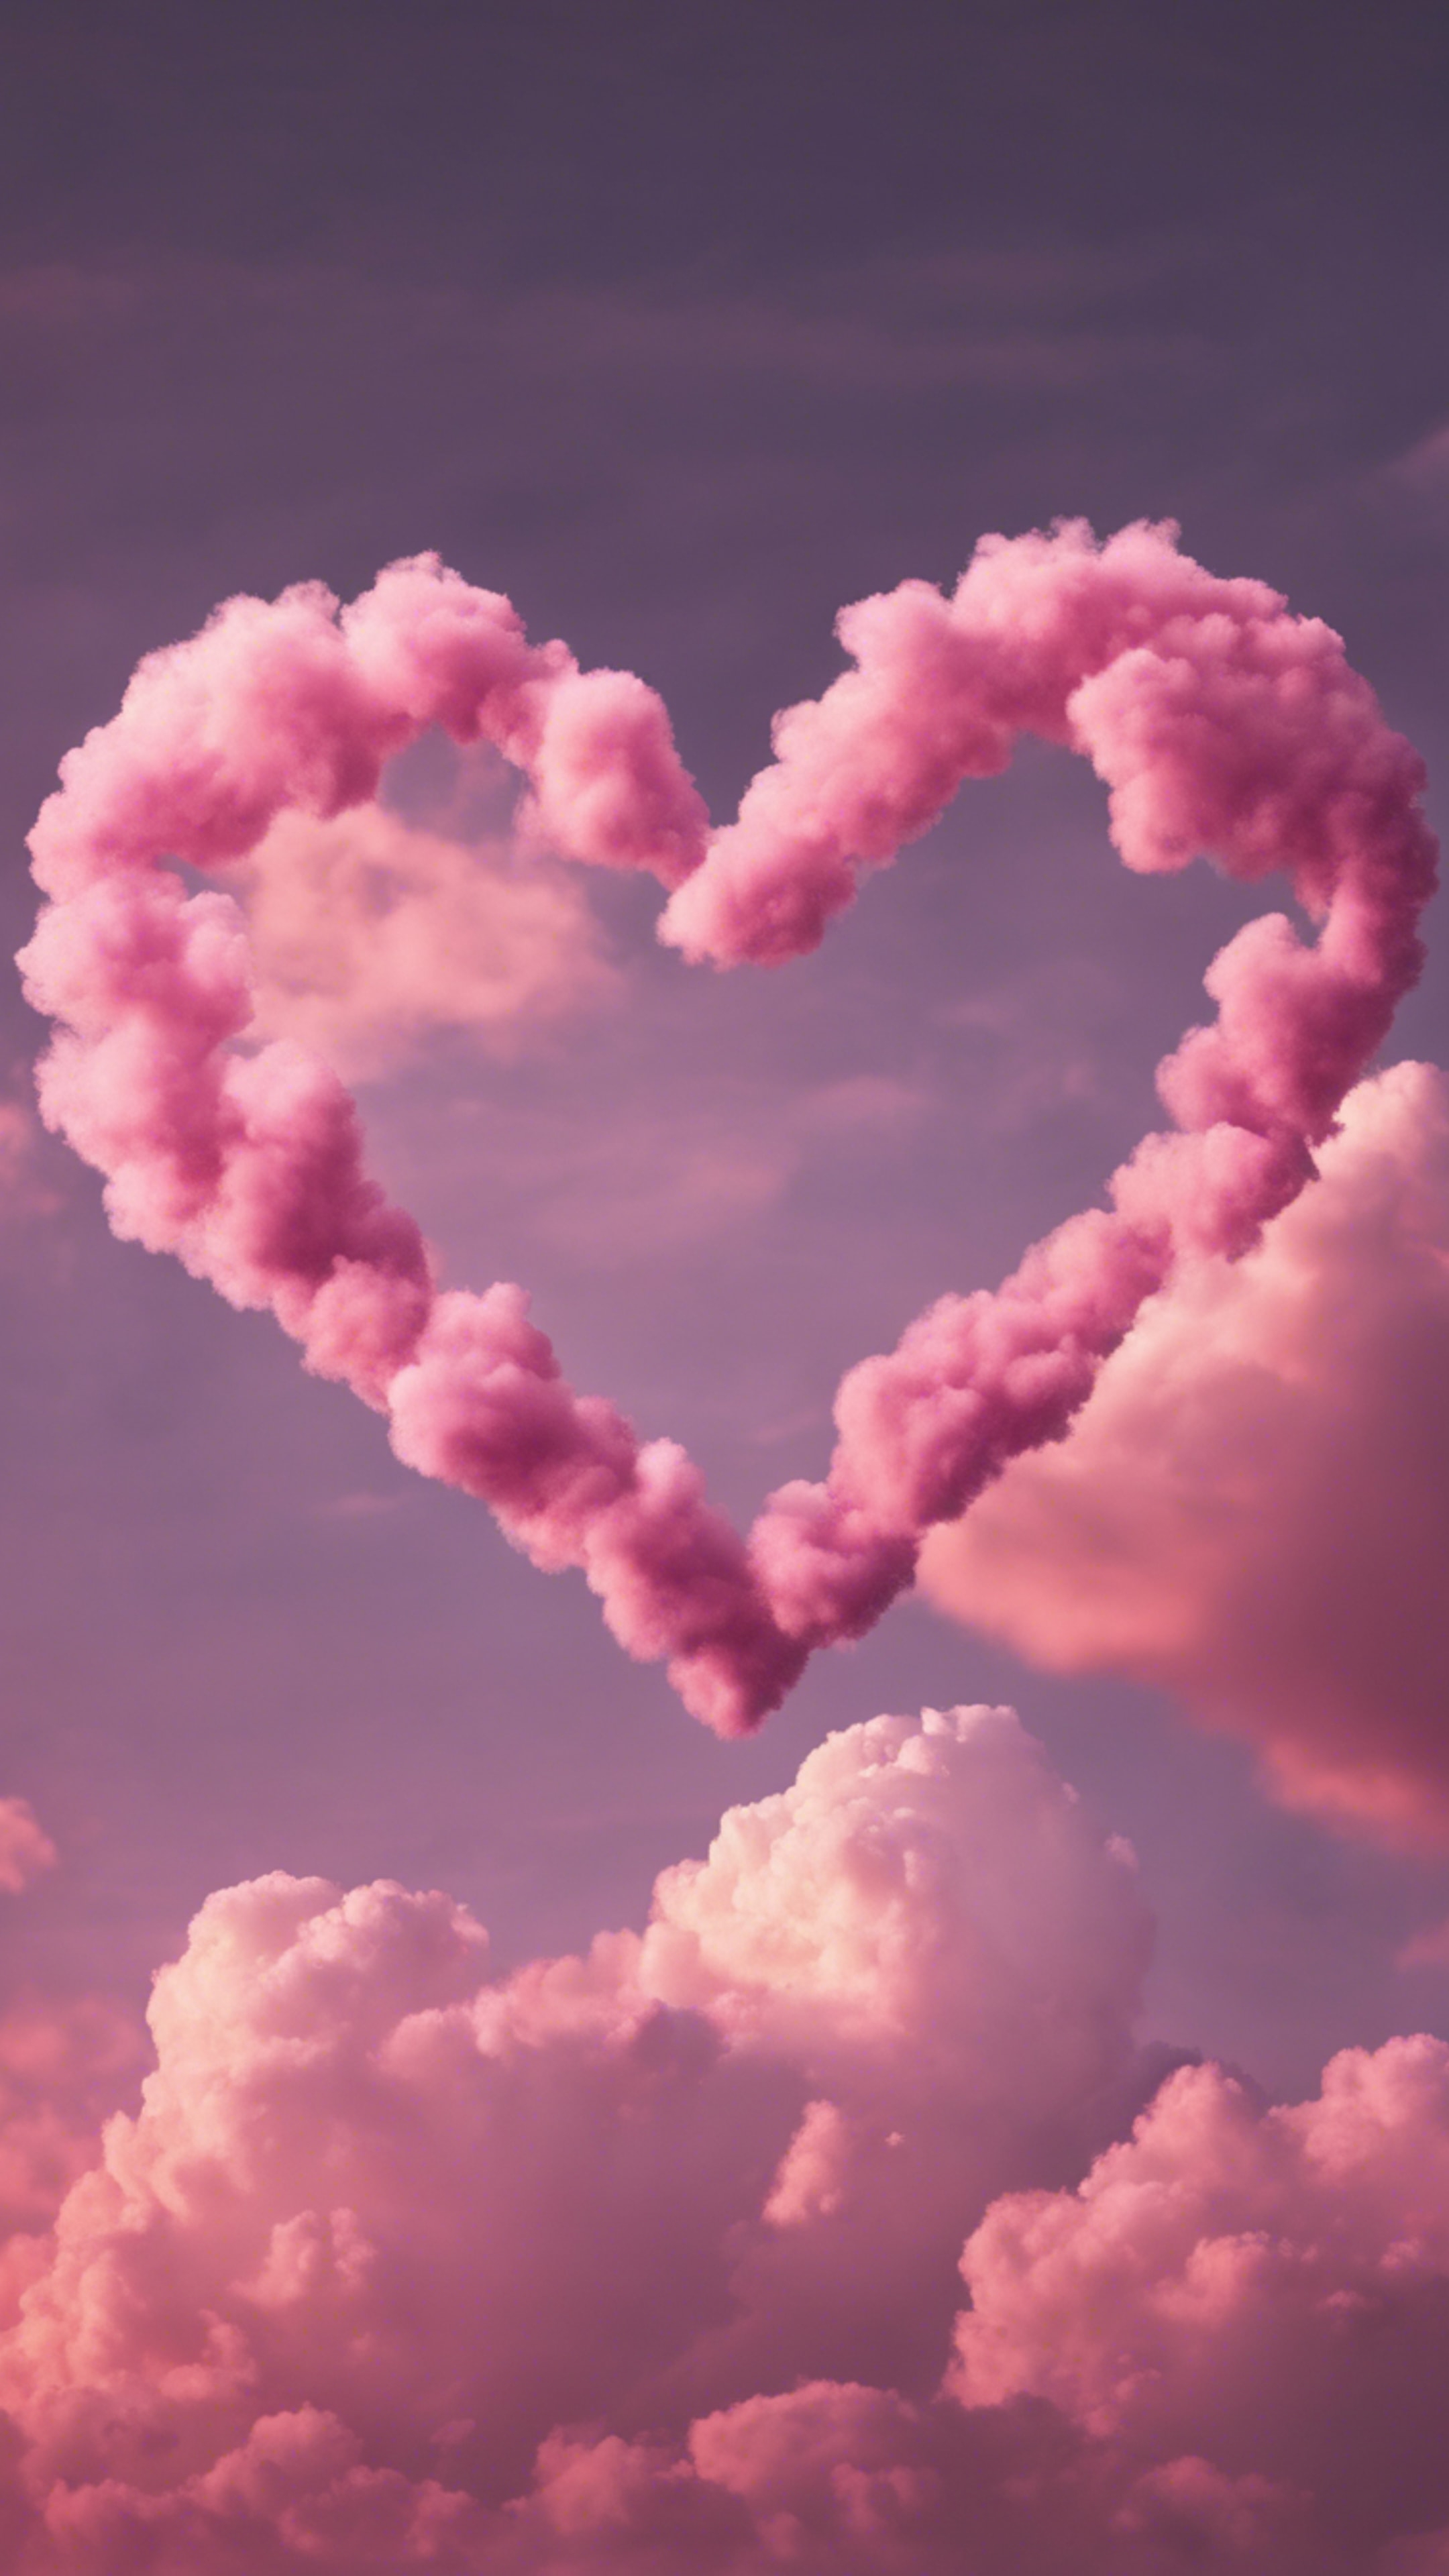 Pink heart-shaped clouds floating in the twilight sky. Hình nền[eb6690dc48484c9aa4c9]